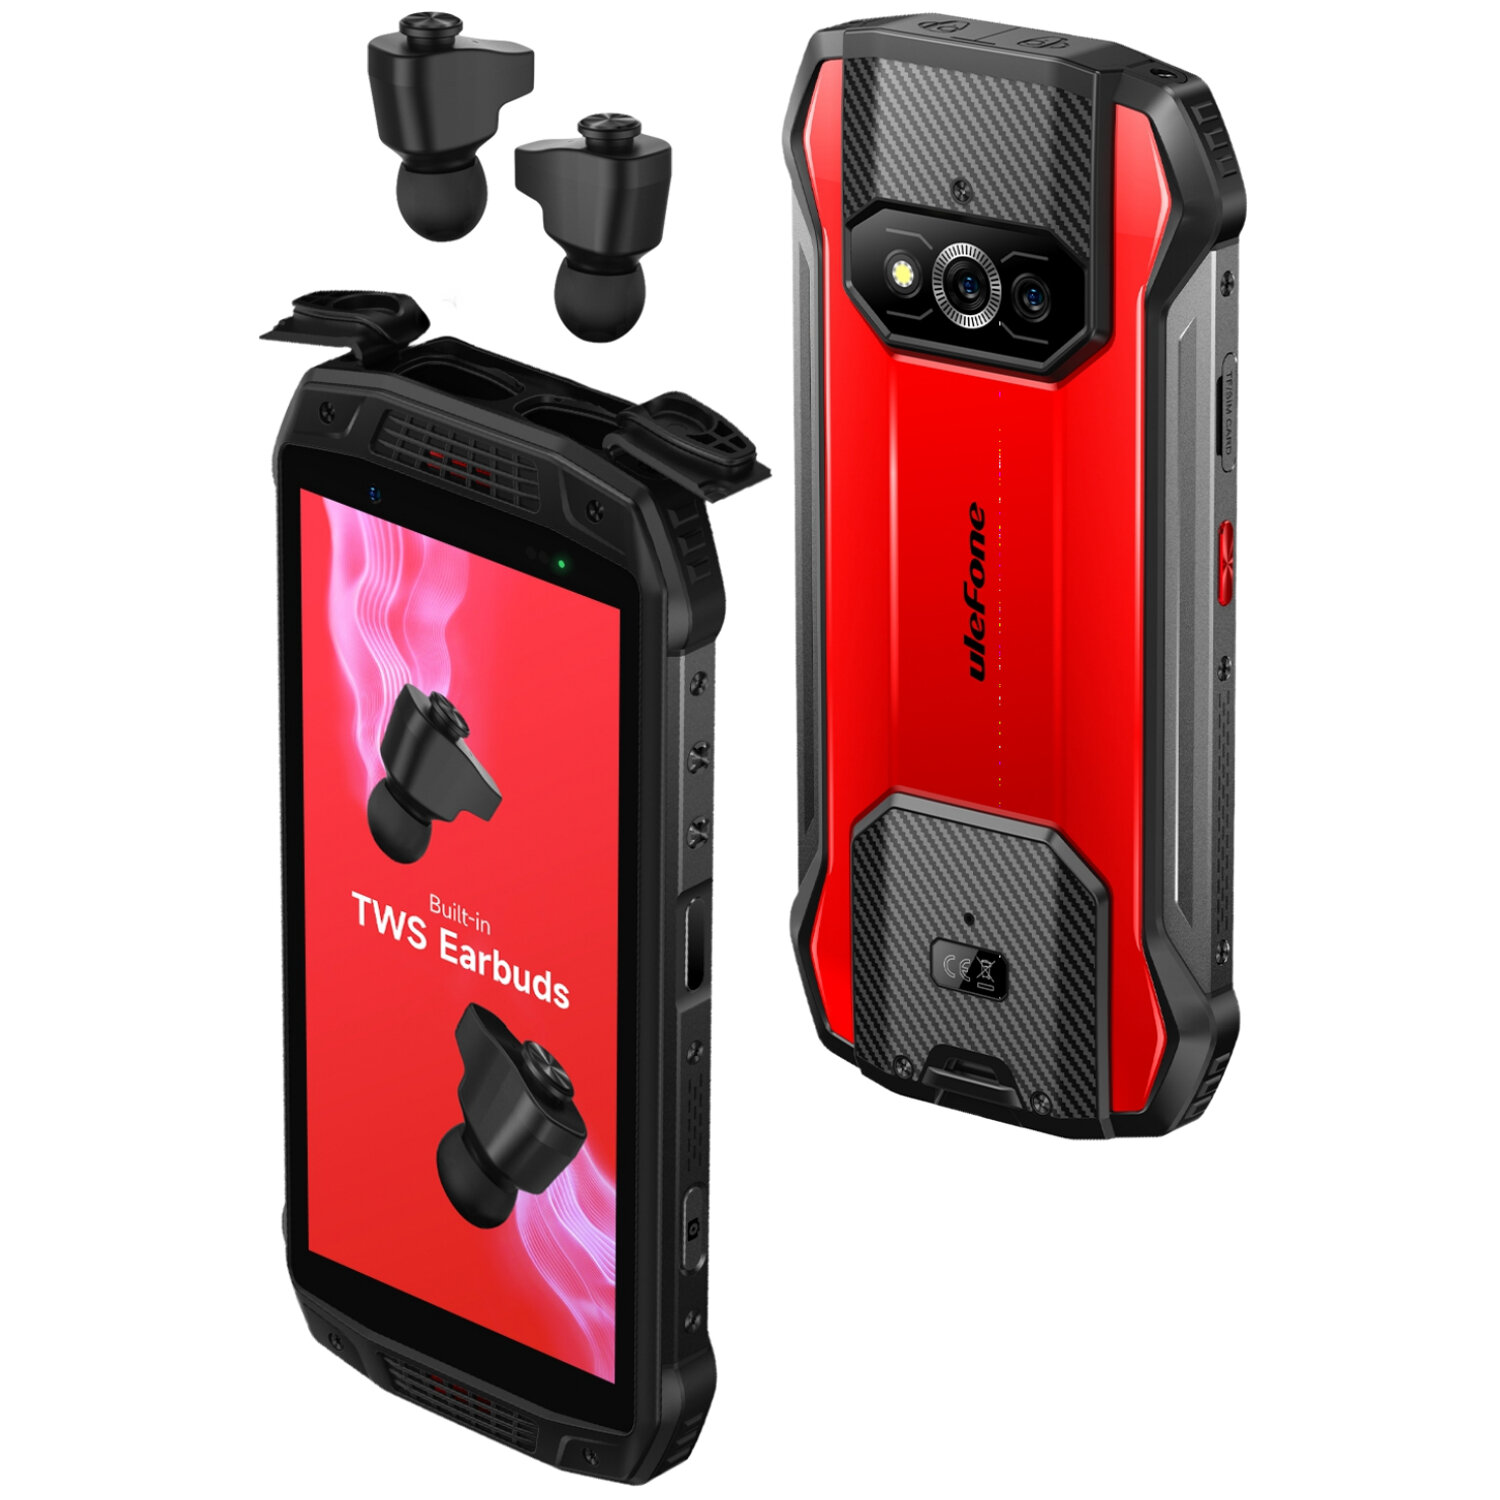 Image of Ulefone Armor 15 Built-in TWS Earbuds Helio G35 6GB 128GB 545 inch 60Hz Dual Speakers NFC 6600mAh Android 12 IP68 IP69K